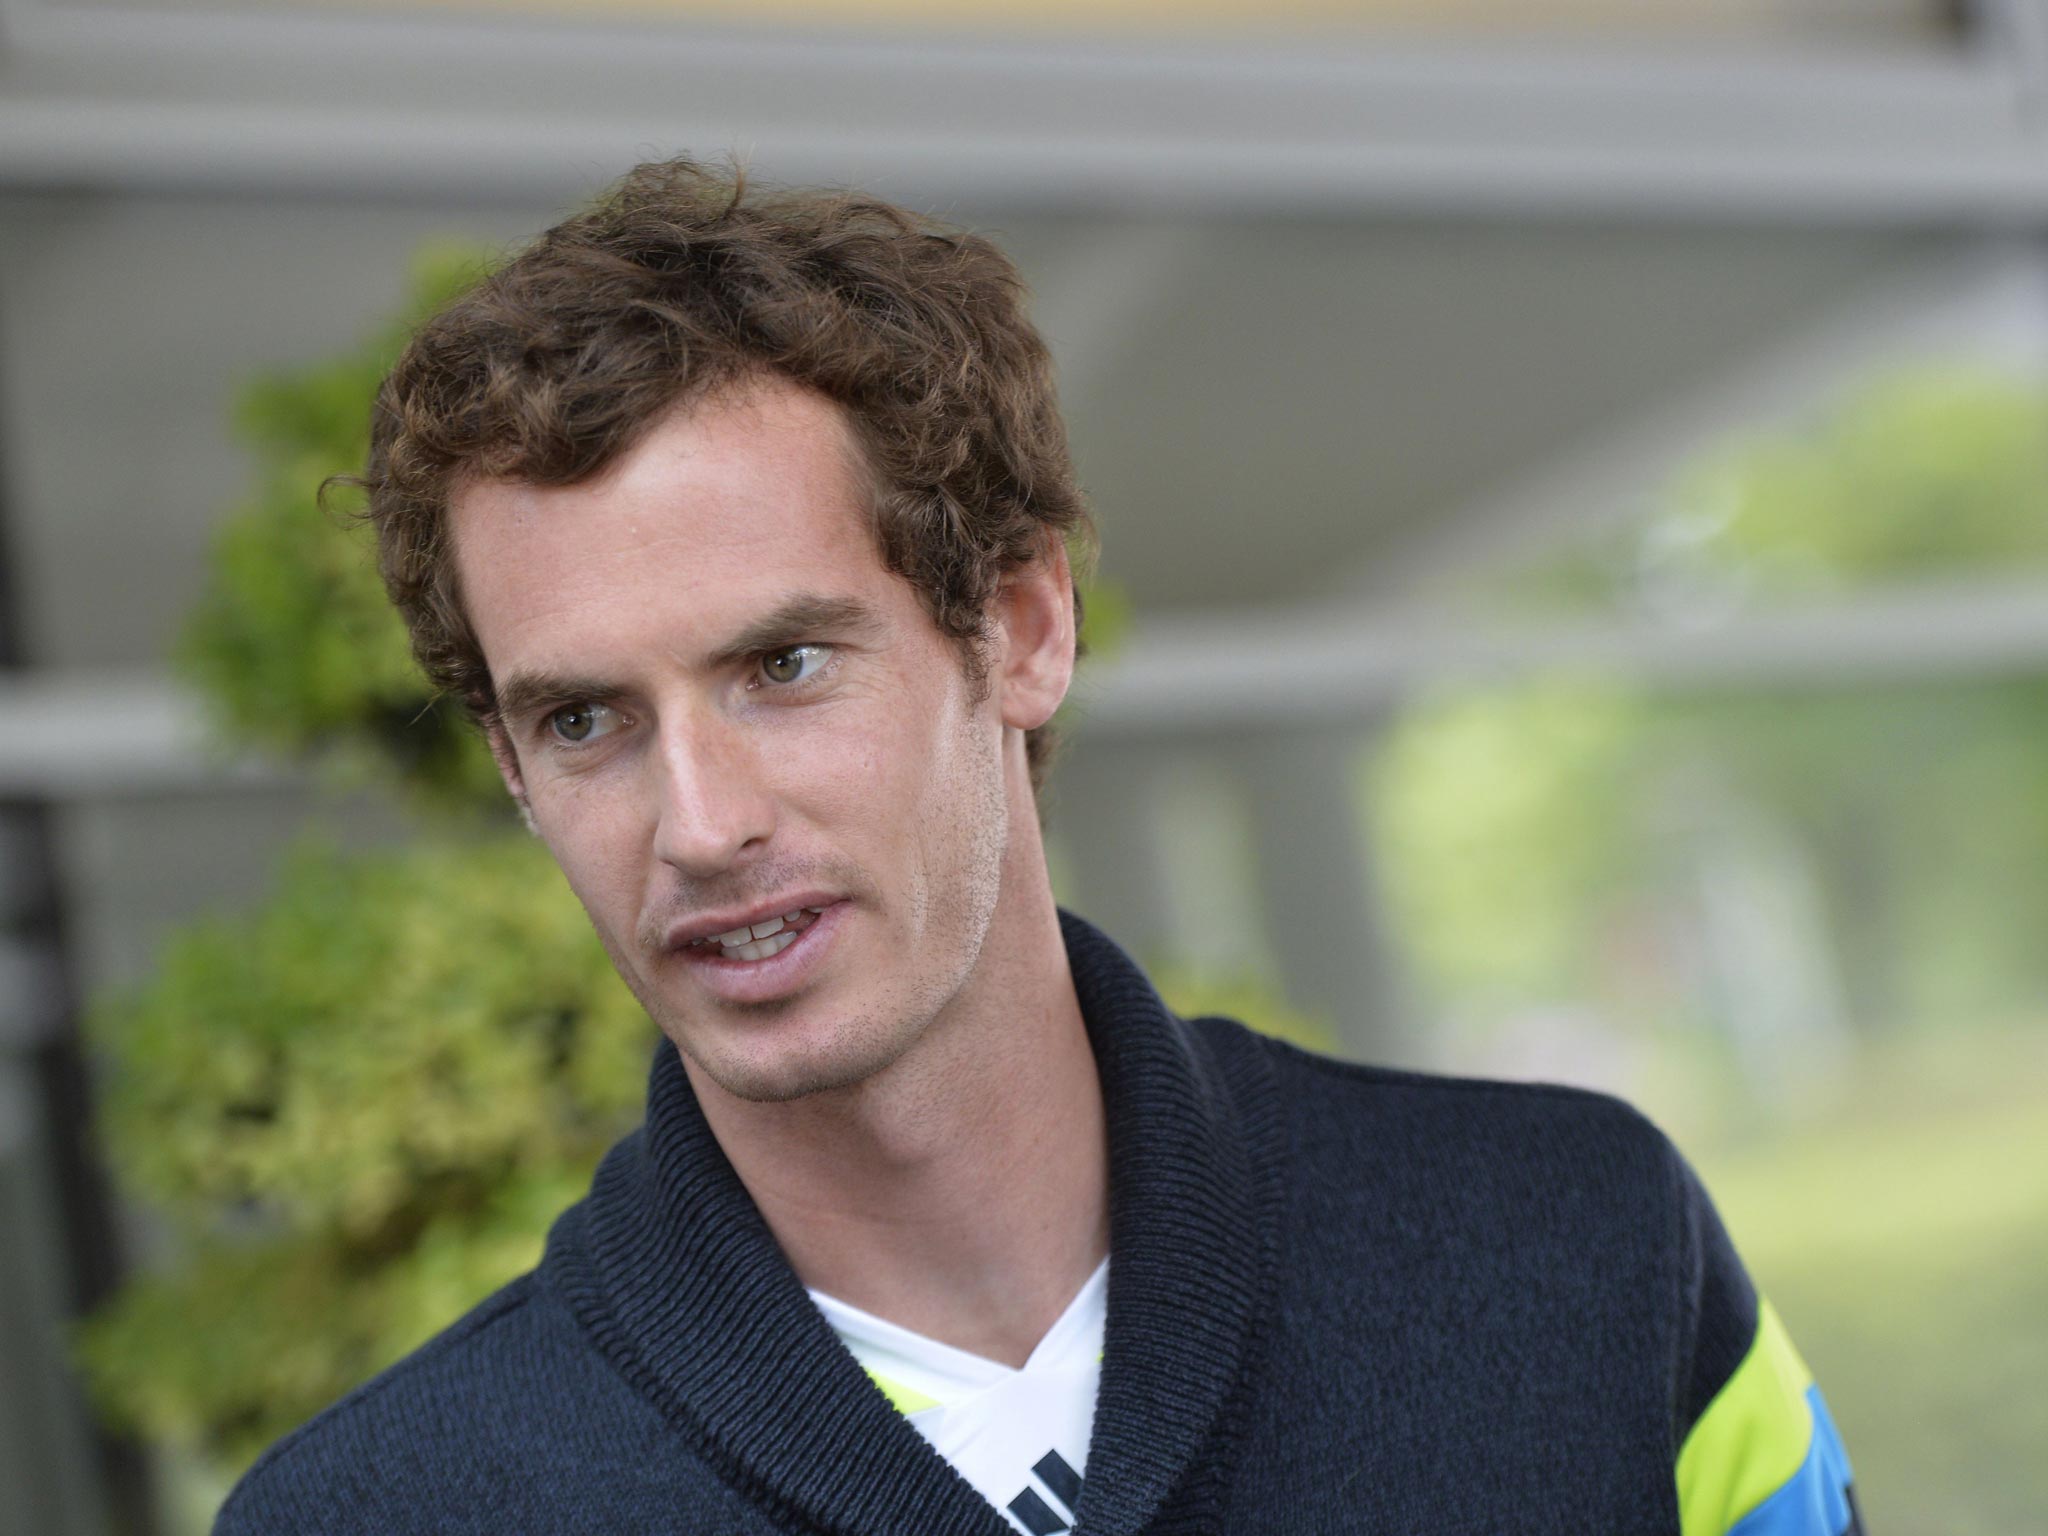 Andy Murray will face Andrey Golubev, the world No 55 in the first round